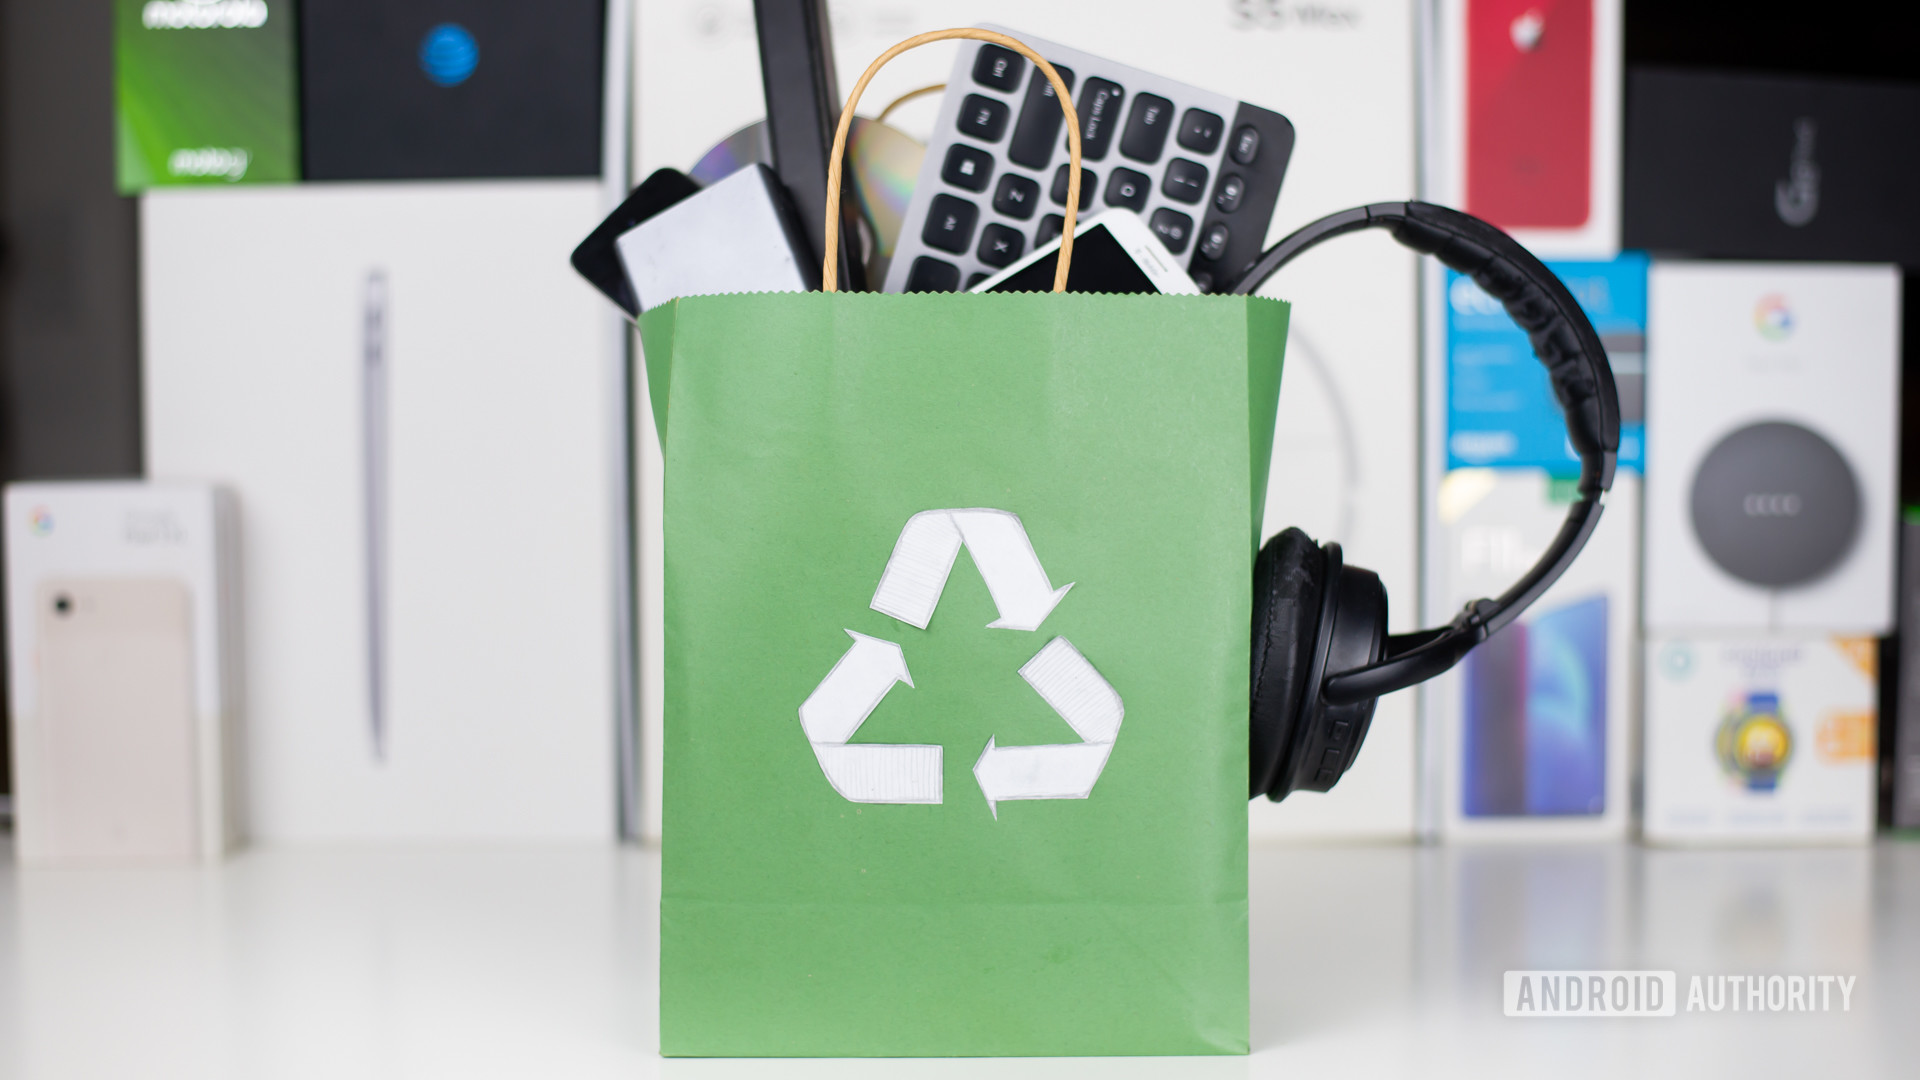 New electronics stuffed into a green paper bag with a white recyling symbol on it in front of electronic device boxes.